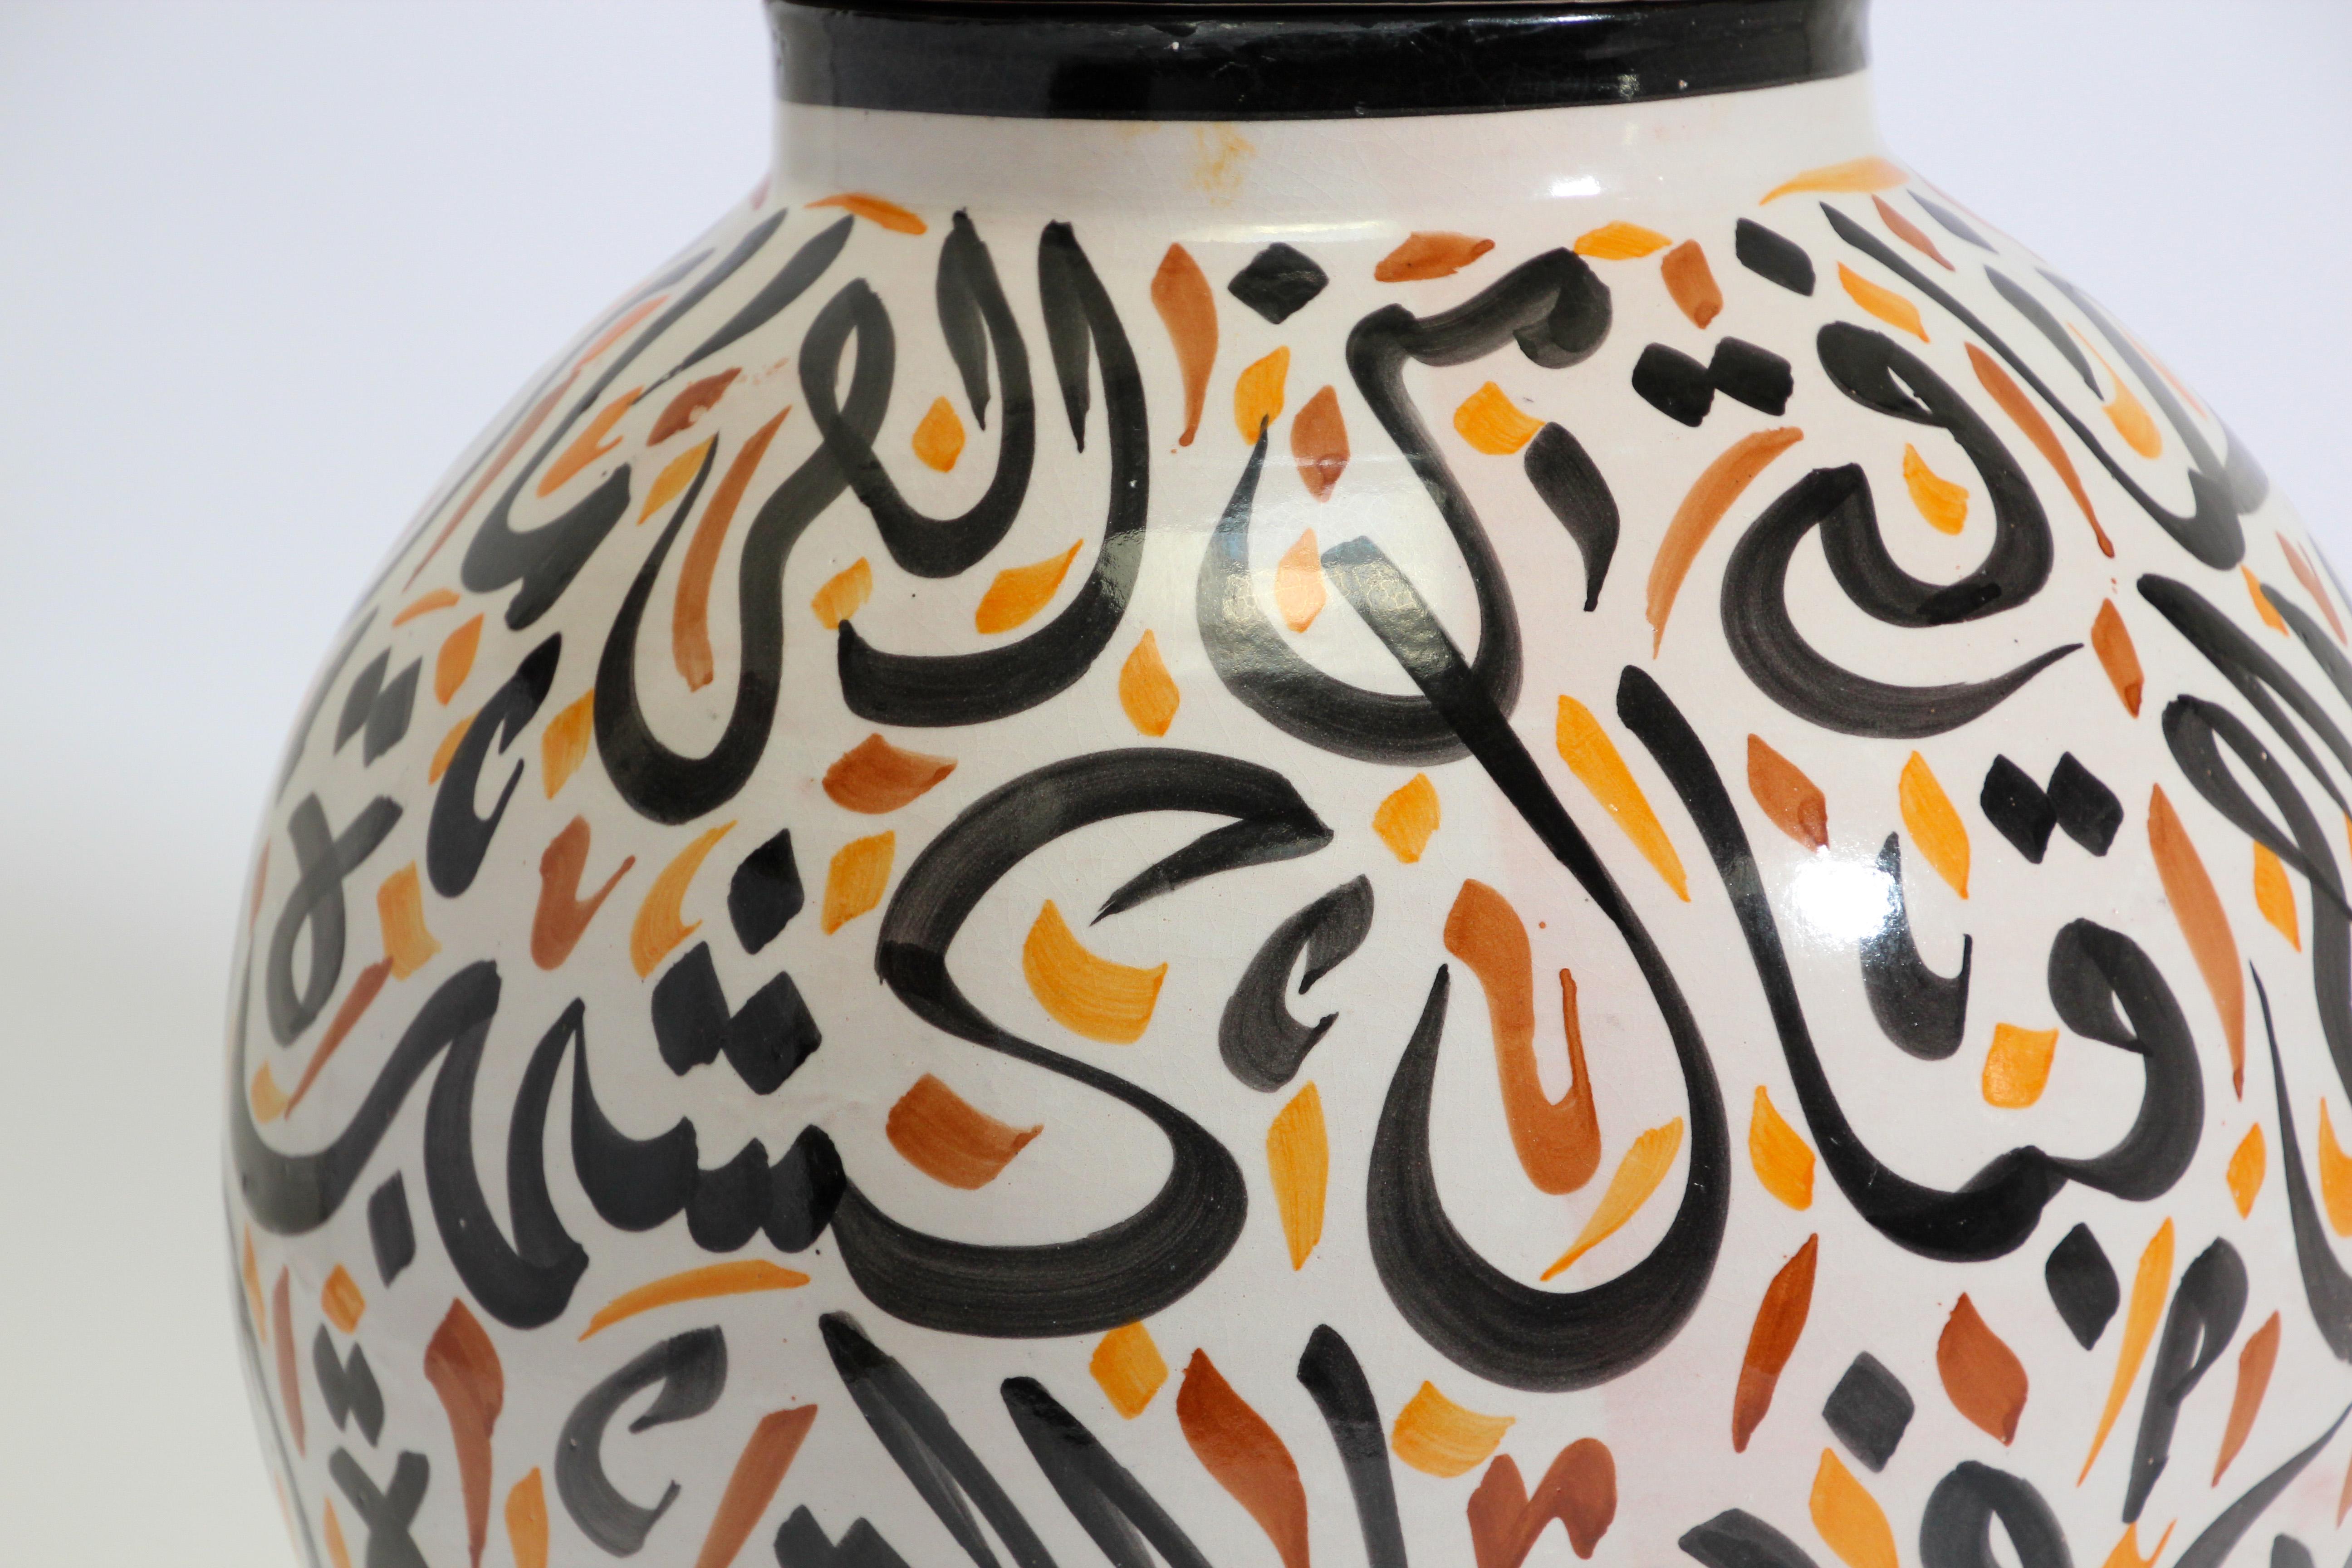 Hand-Crafted Moroccan Ceramic Lidded Urn with Arabic Calligraphy Lettrism Writing For Sale